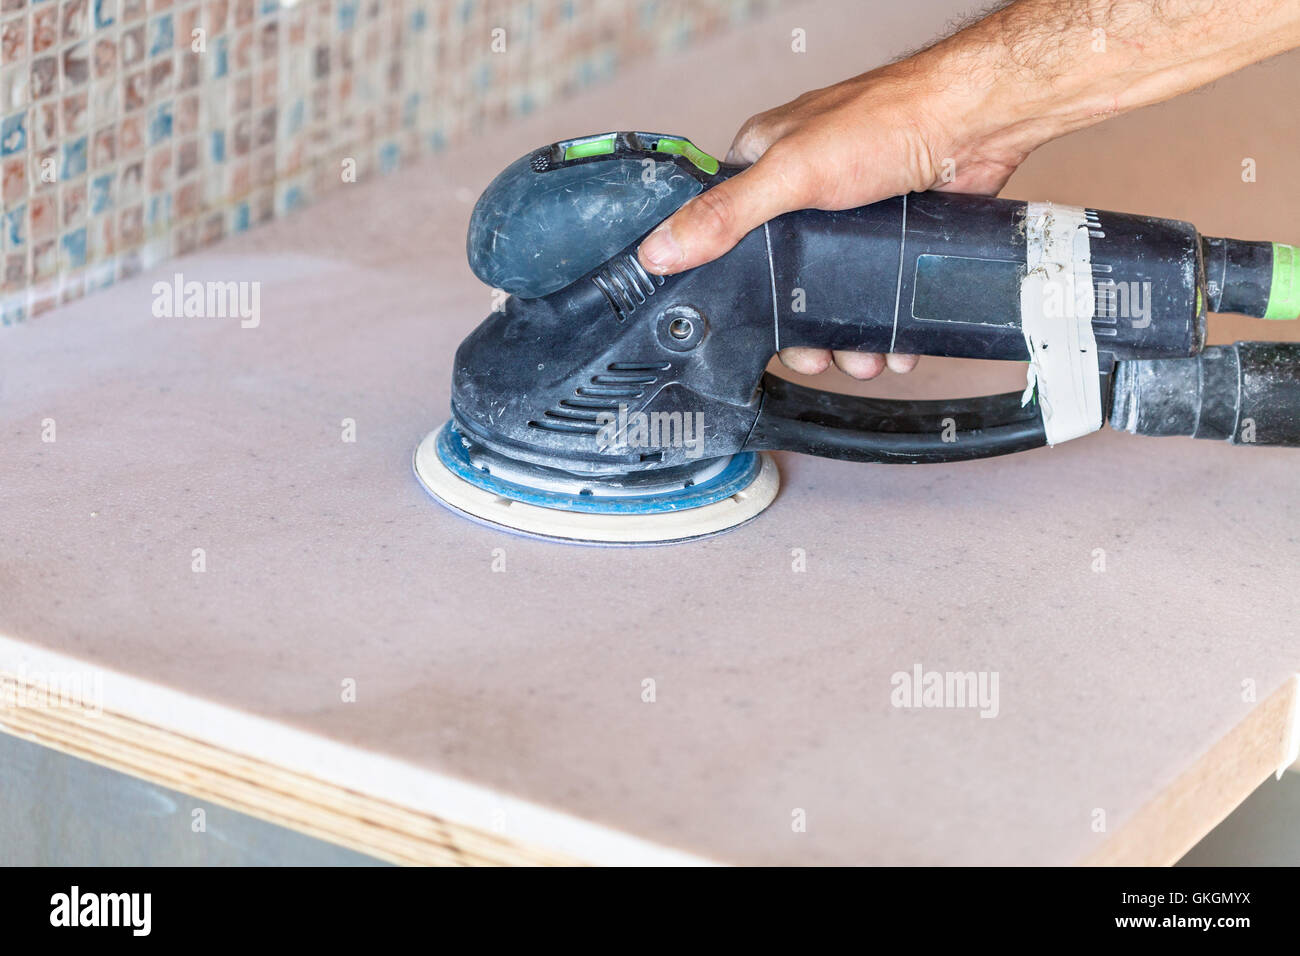 installing new tabletop on kitchen - worker sanding countertop from artificial stone by random orbital sander Stock Photo